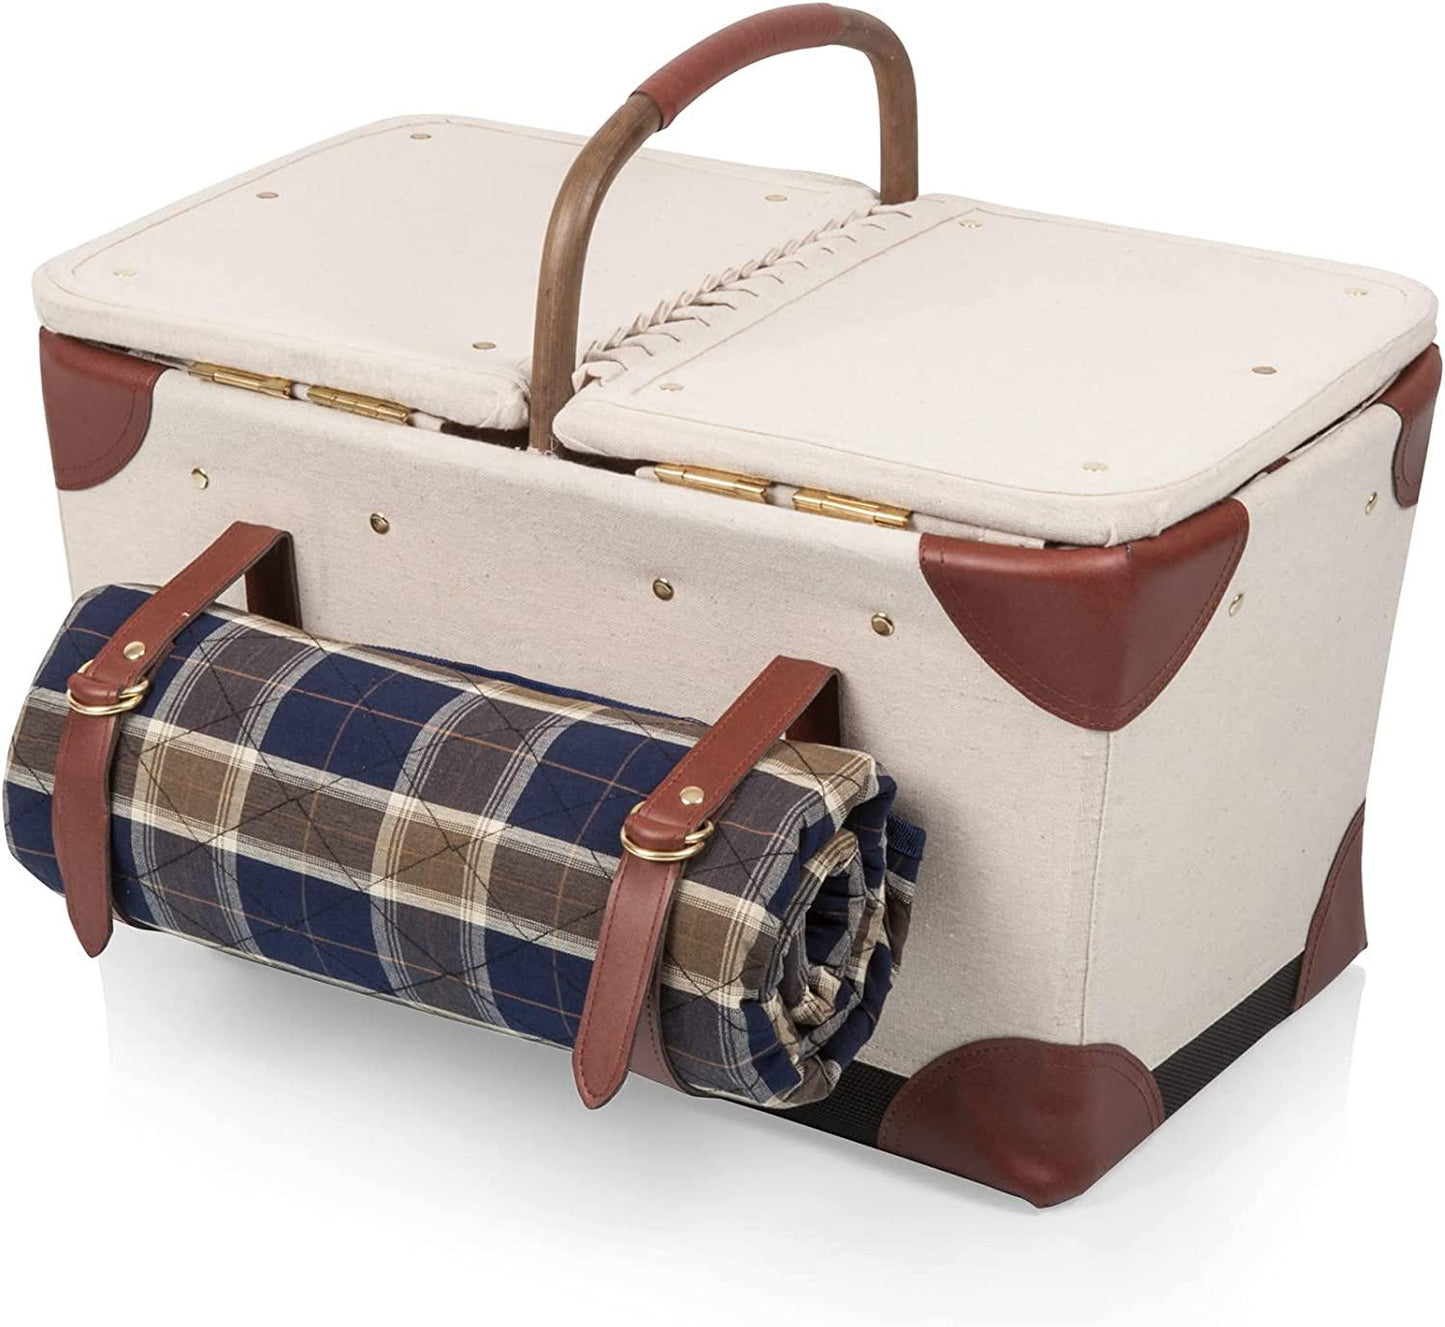 PICNIC TIME Pioneer Deluxe Picnic Basket with Blanket, Original Design Set for 2, Beige Canvas with Navy Blue and Brown Accents